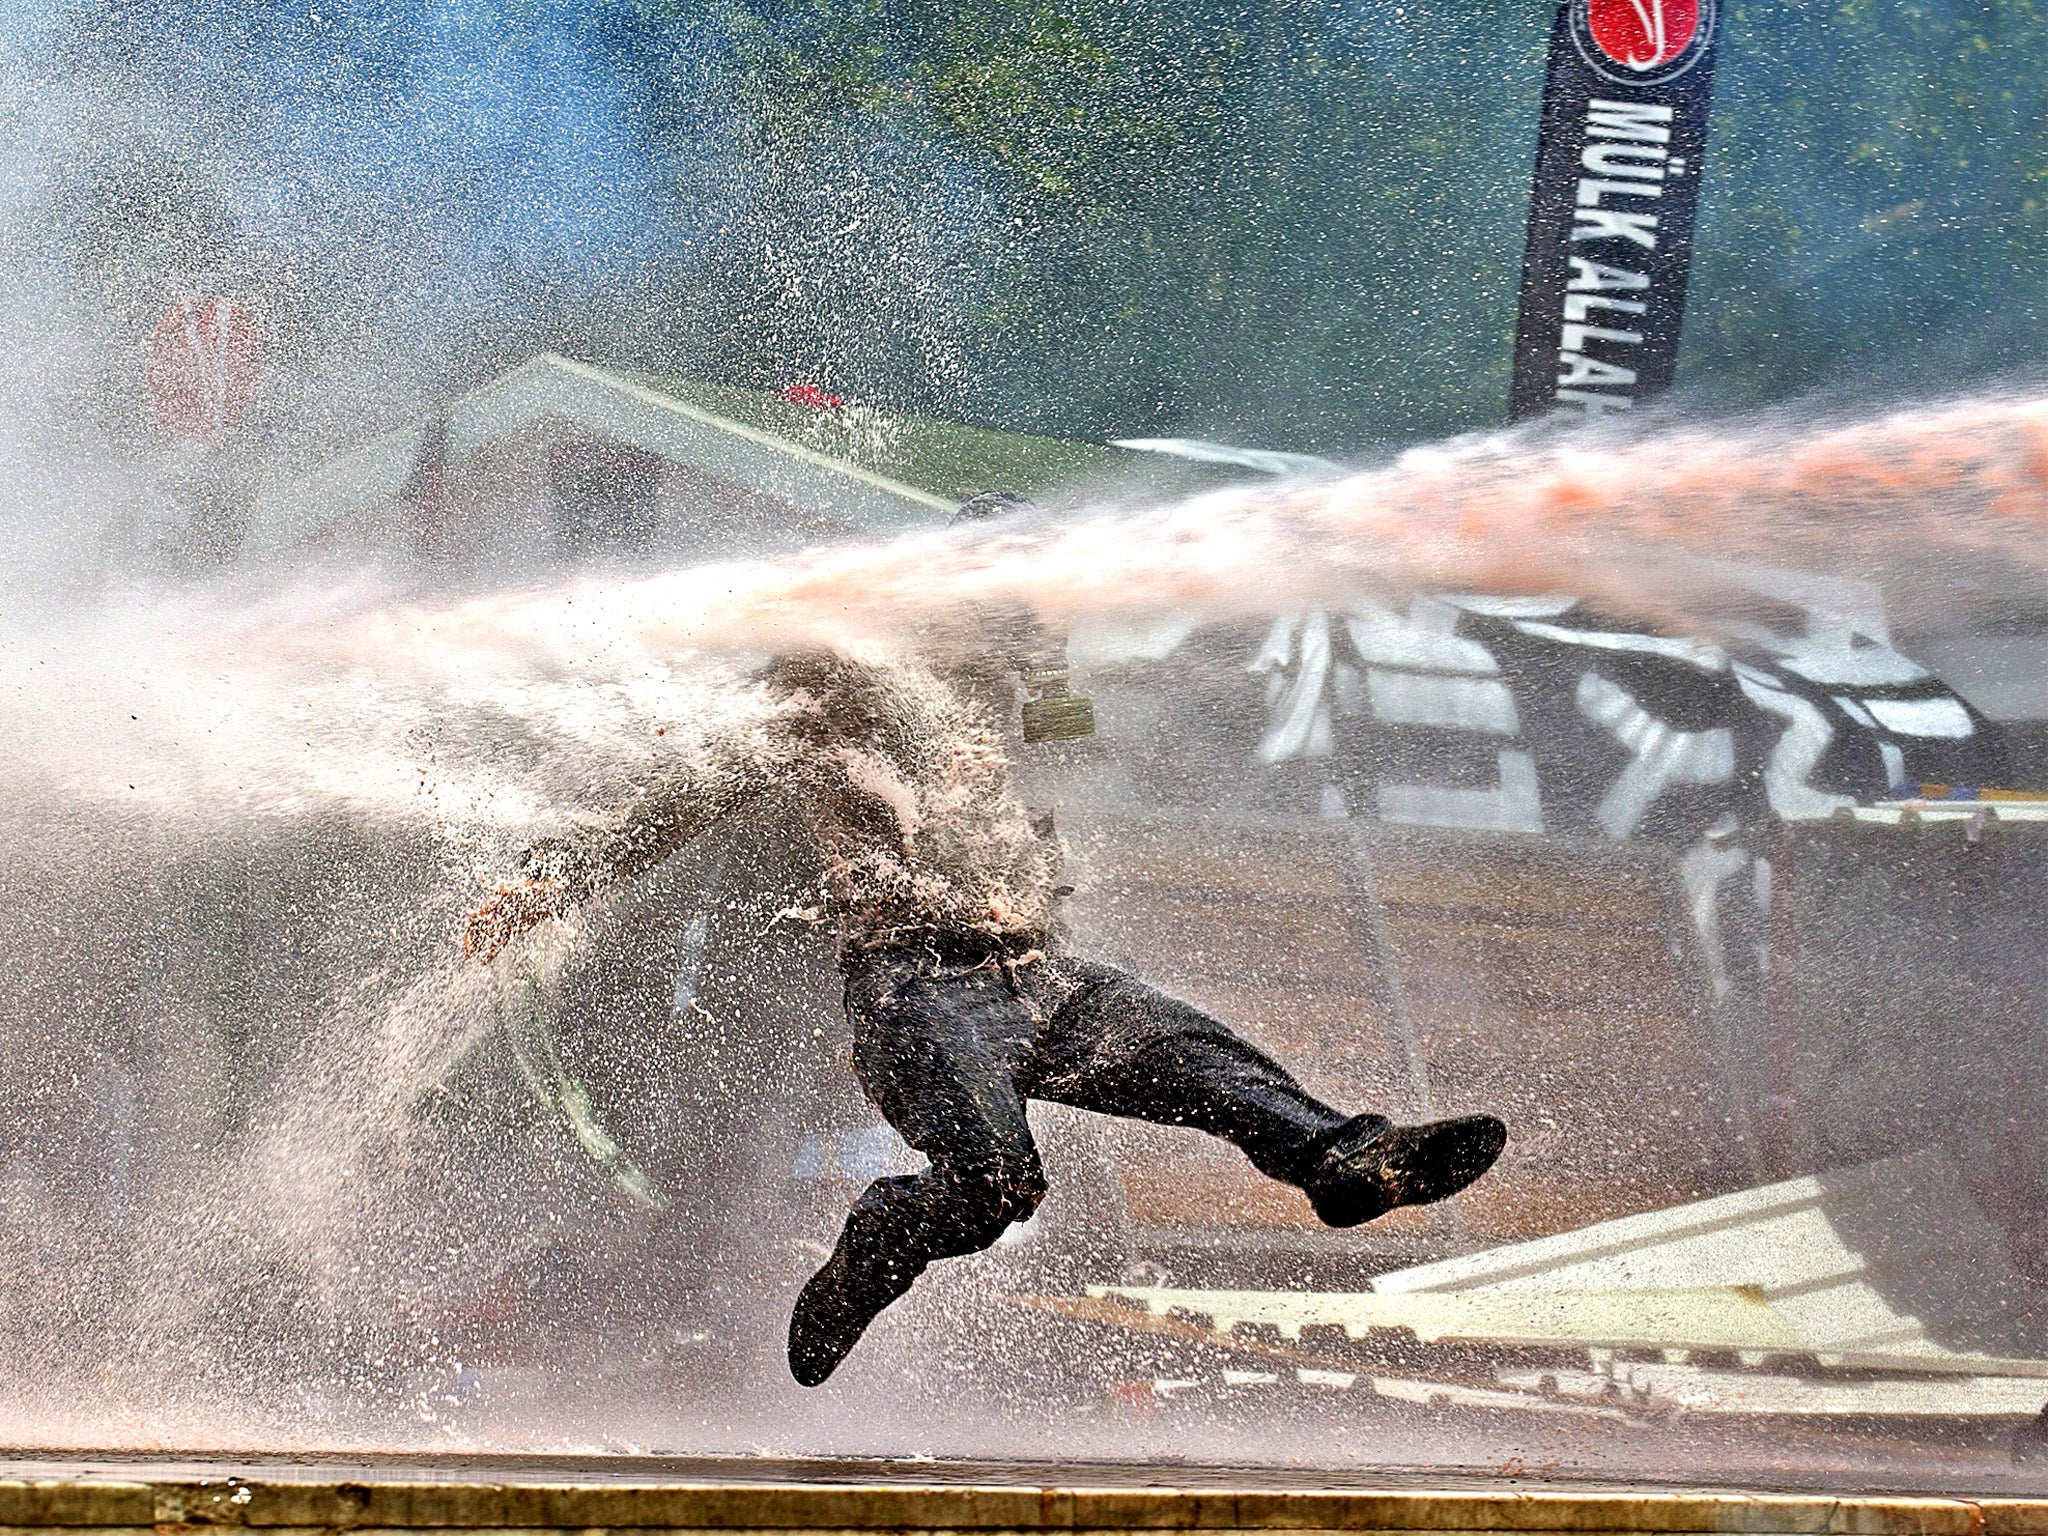 A protestor is hit by water sprayed from a water cannon during clashes in Taksim Square